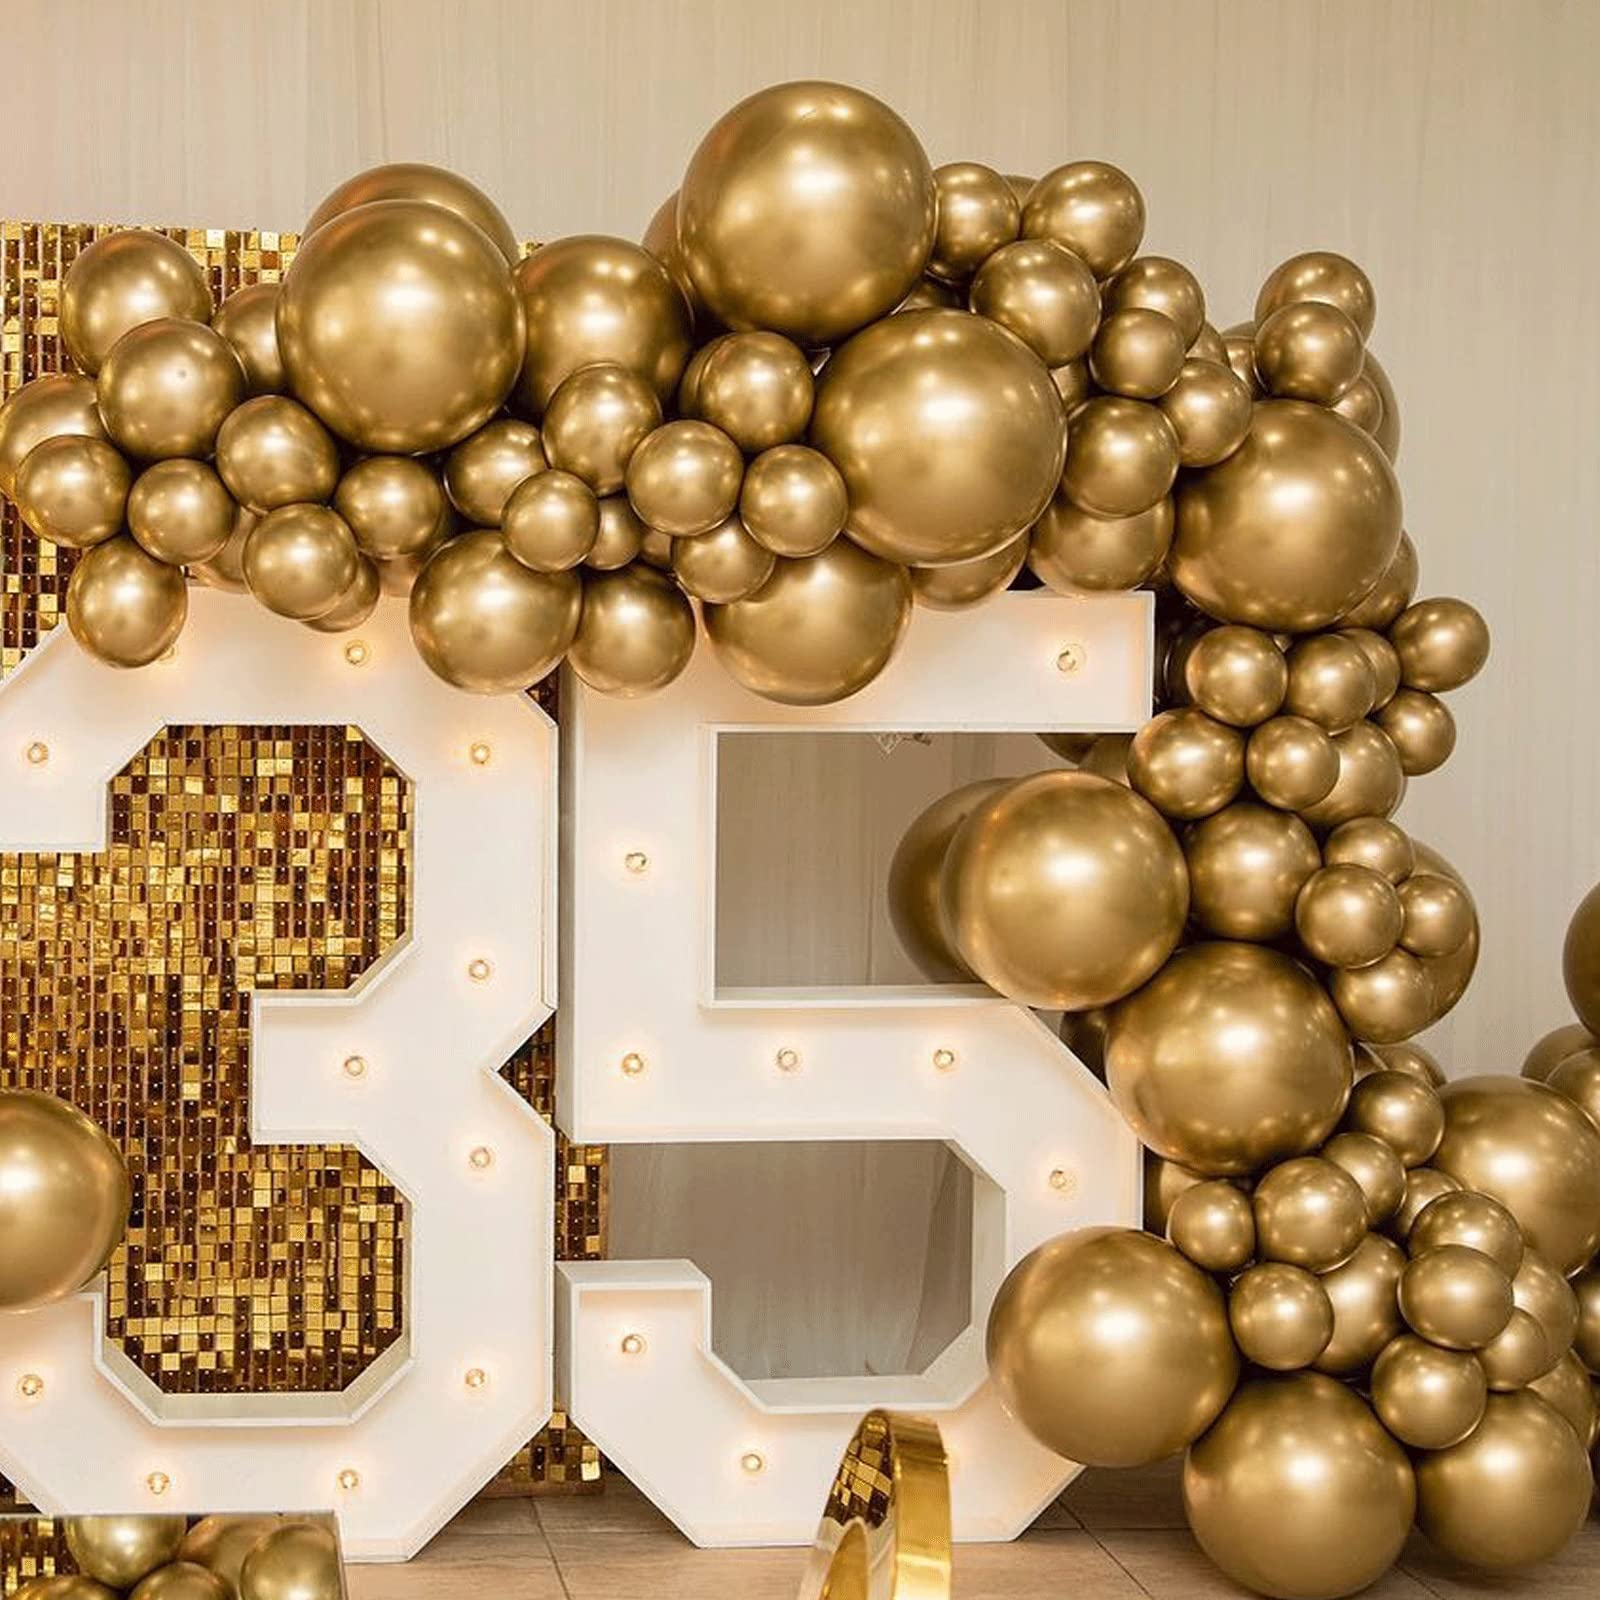 Gold Metallic Chrome Balloon Arch Kit, 101PCS 18In 12In 10In 5In Gold Latex Garland Arch Kit for Birthday Party Graduation Baby Shower Wedding Holiday Balloon Decoration